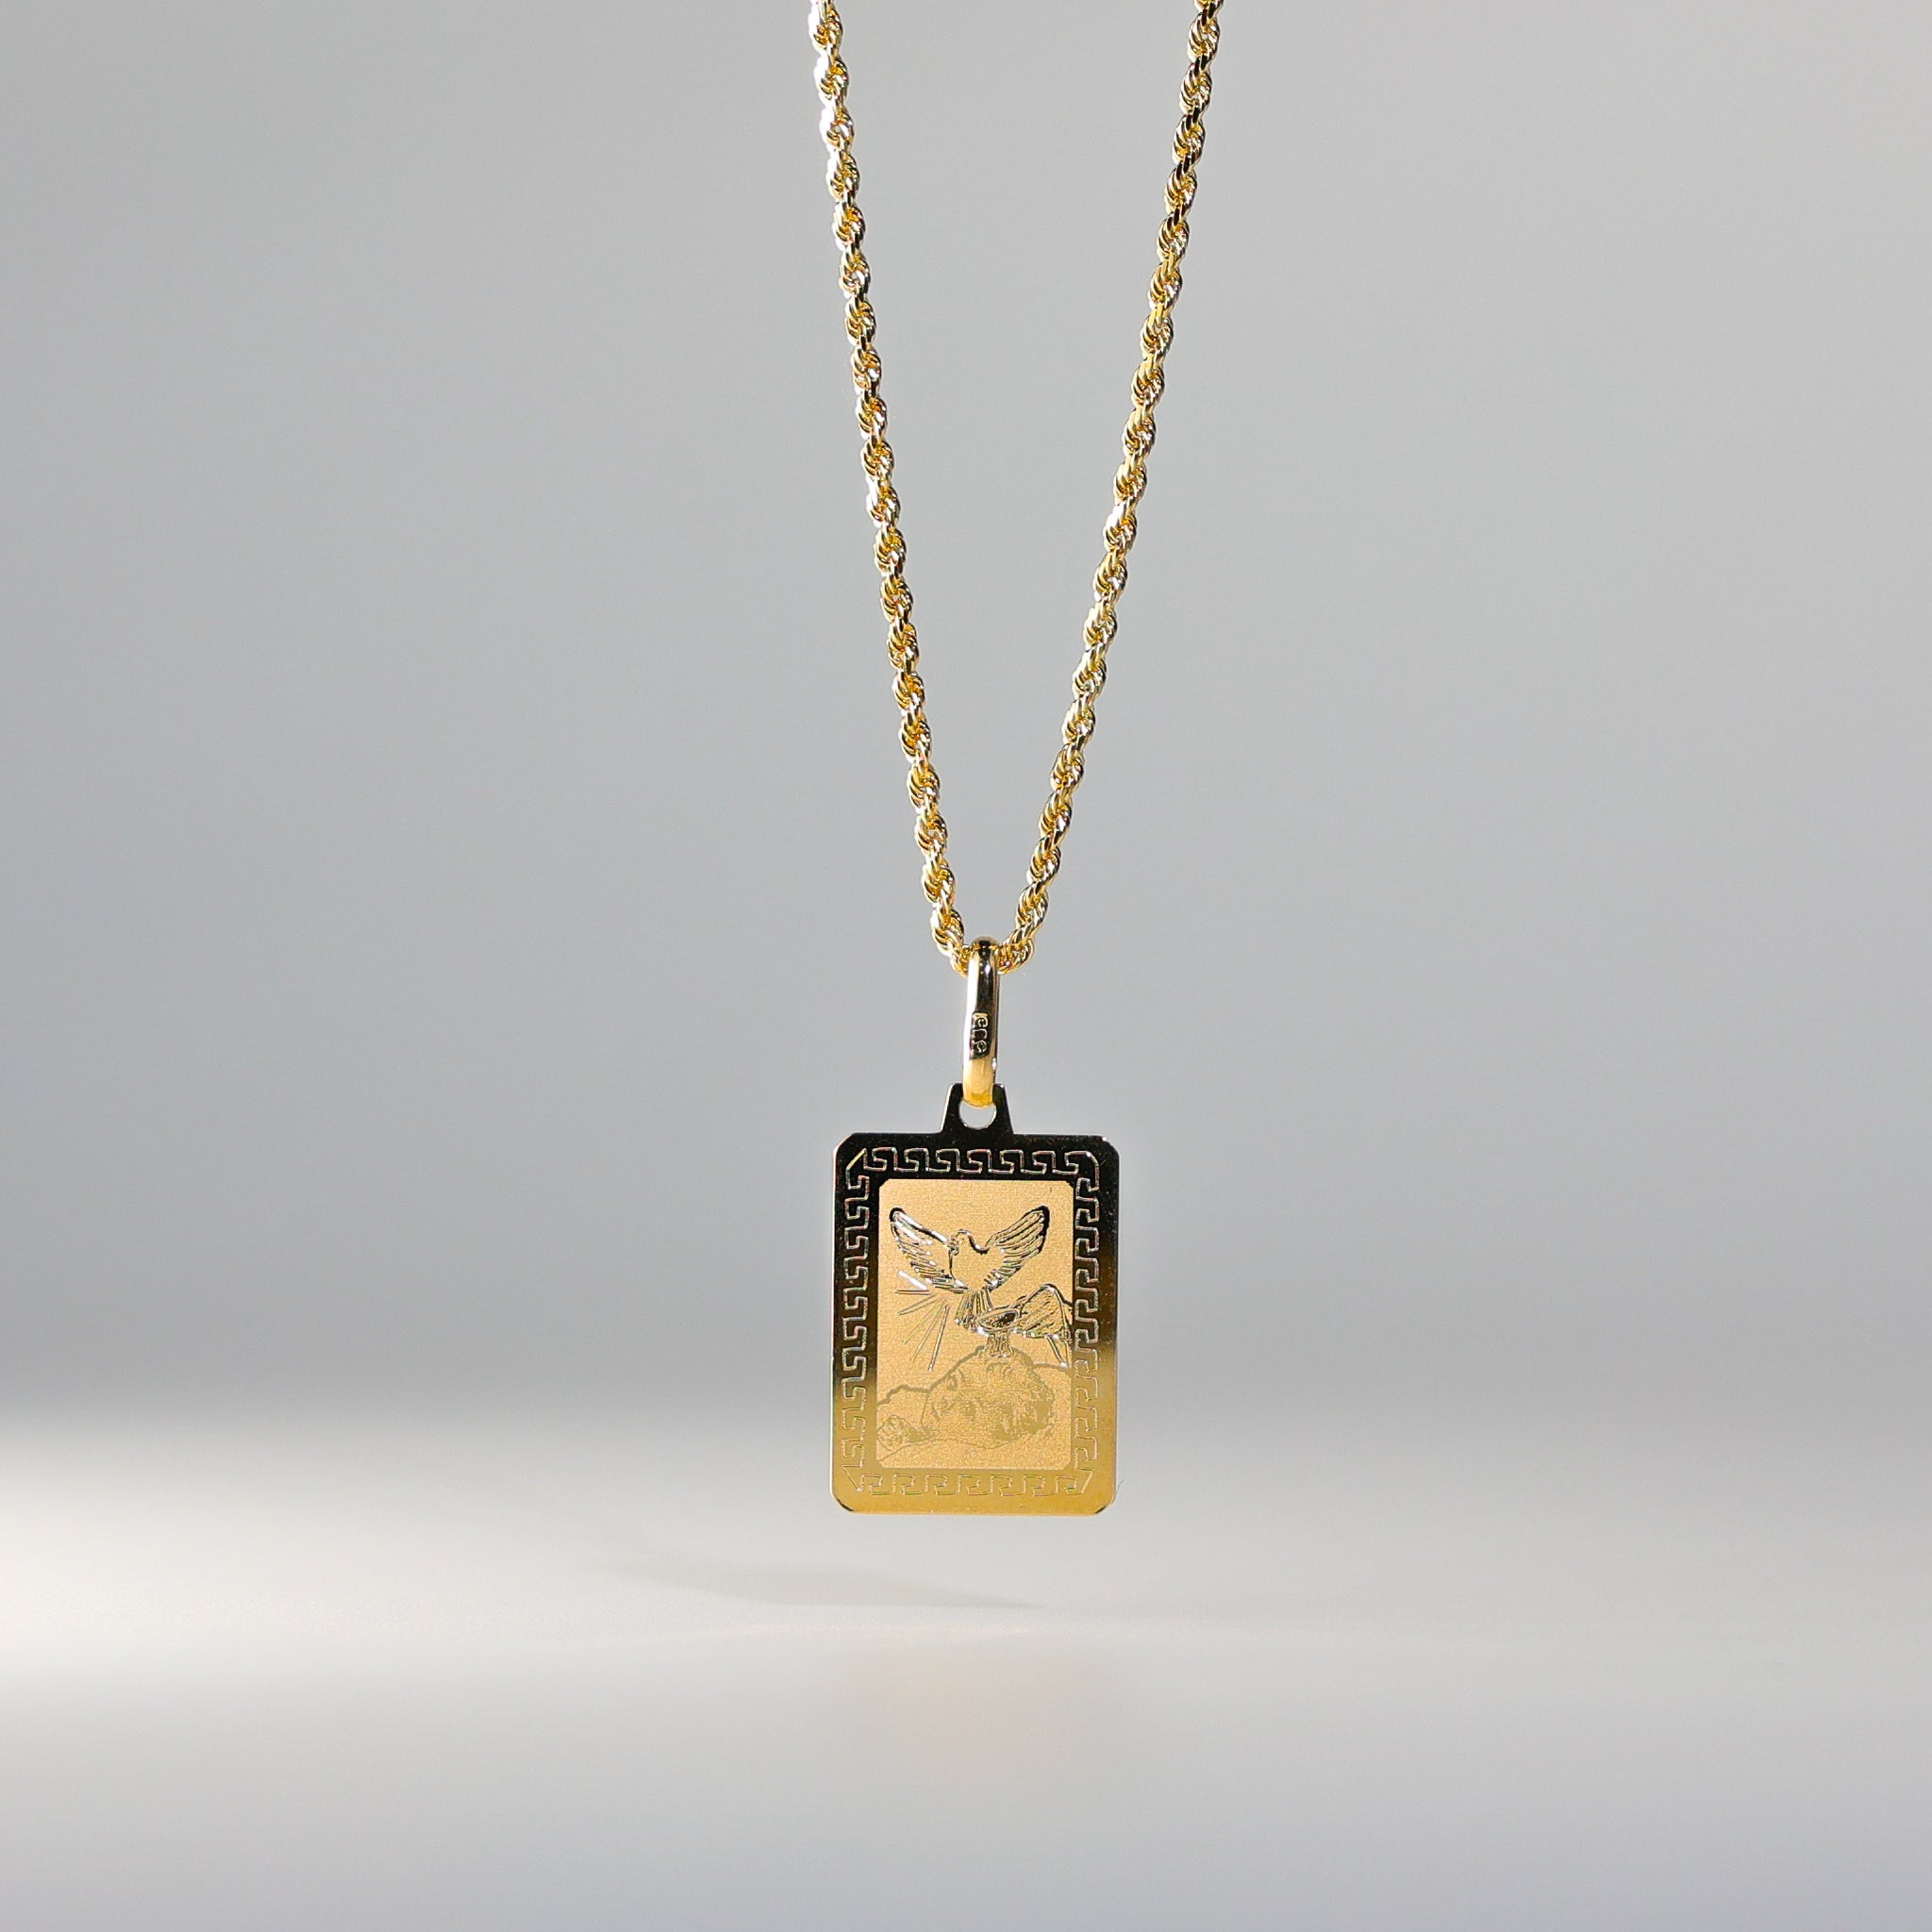 Charlie and Co Jewelry | Gold Boy Baptism Pendant | 14K Gold Baptism Pendant Pendant + 22 Cable Chain